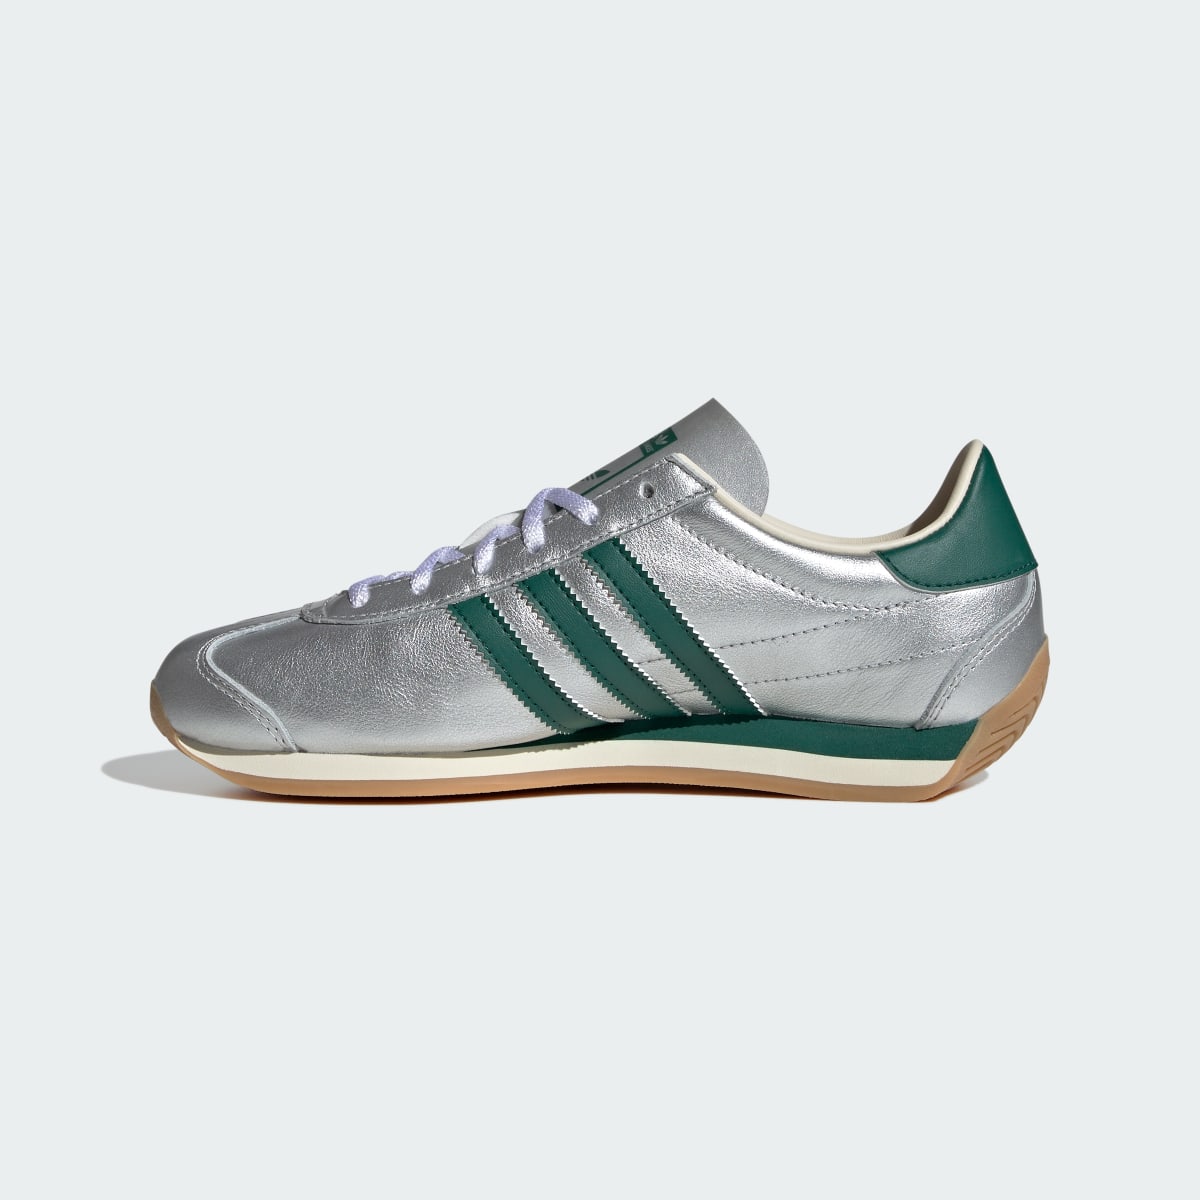 Adidas Chaussure Country OG. 7